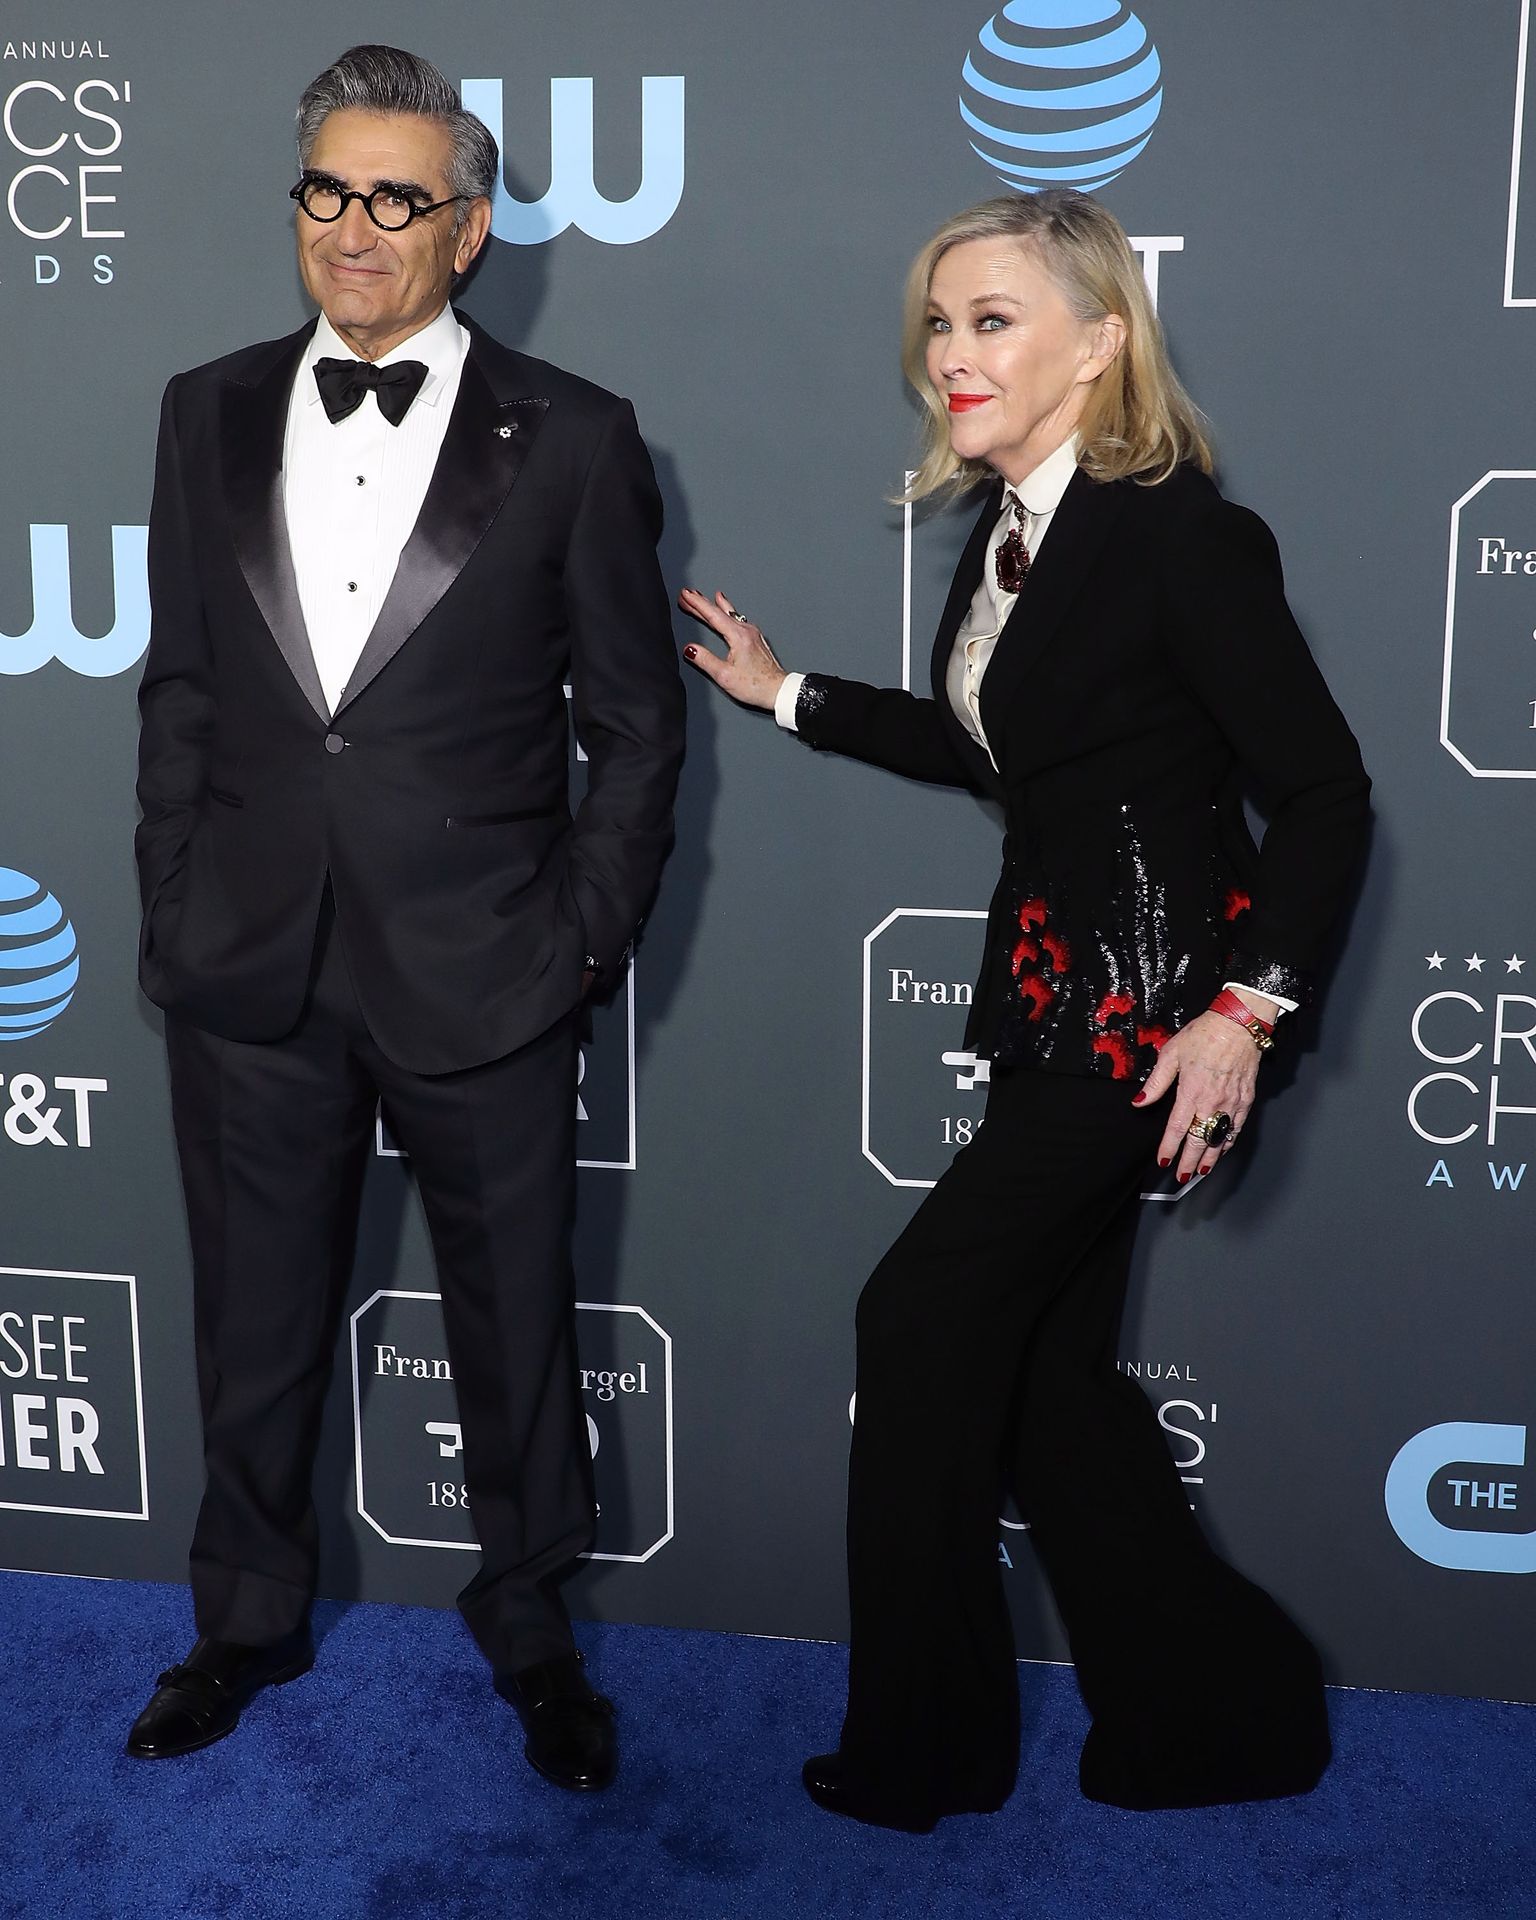 Eugene Levy and Catherine O'Hara at the 24th Annual Critics' Choice Awards in 2019 in Santa Monica | Source: Getty Images